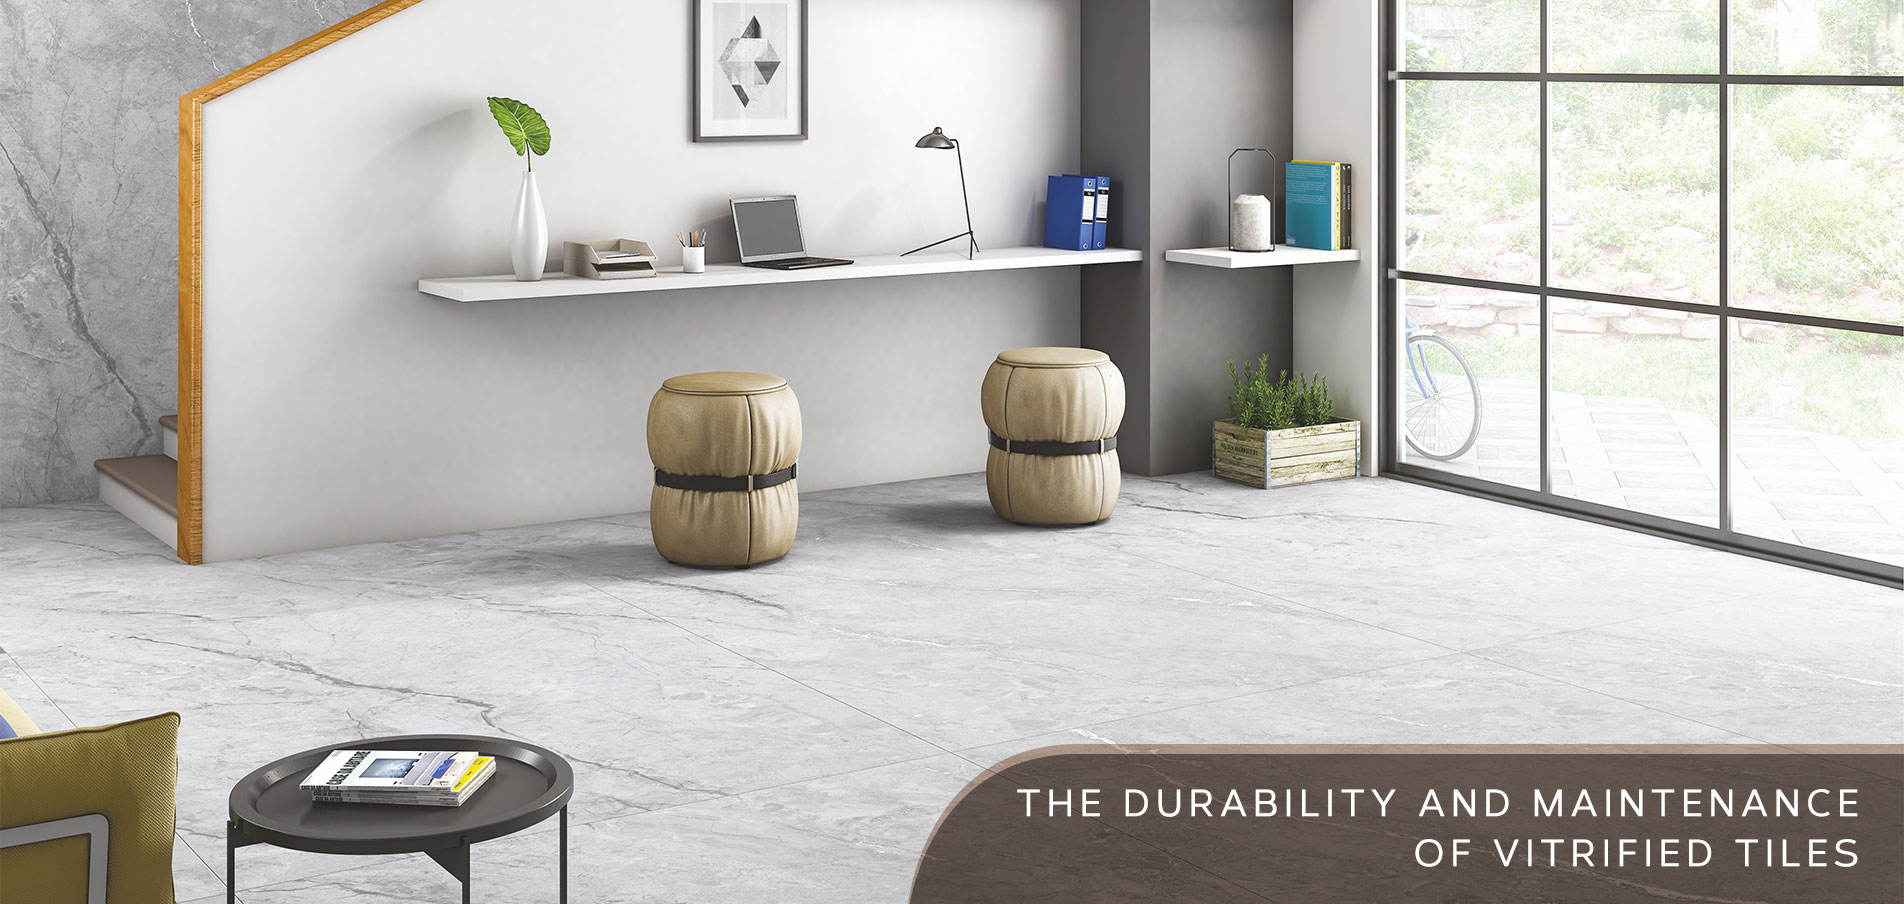 The durability and maintenance of vitrified tiles